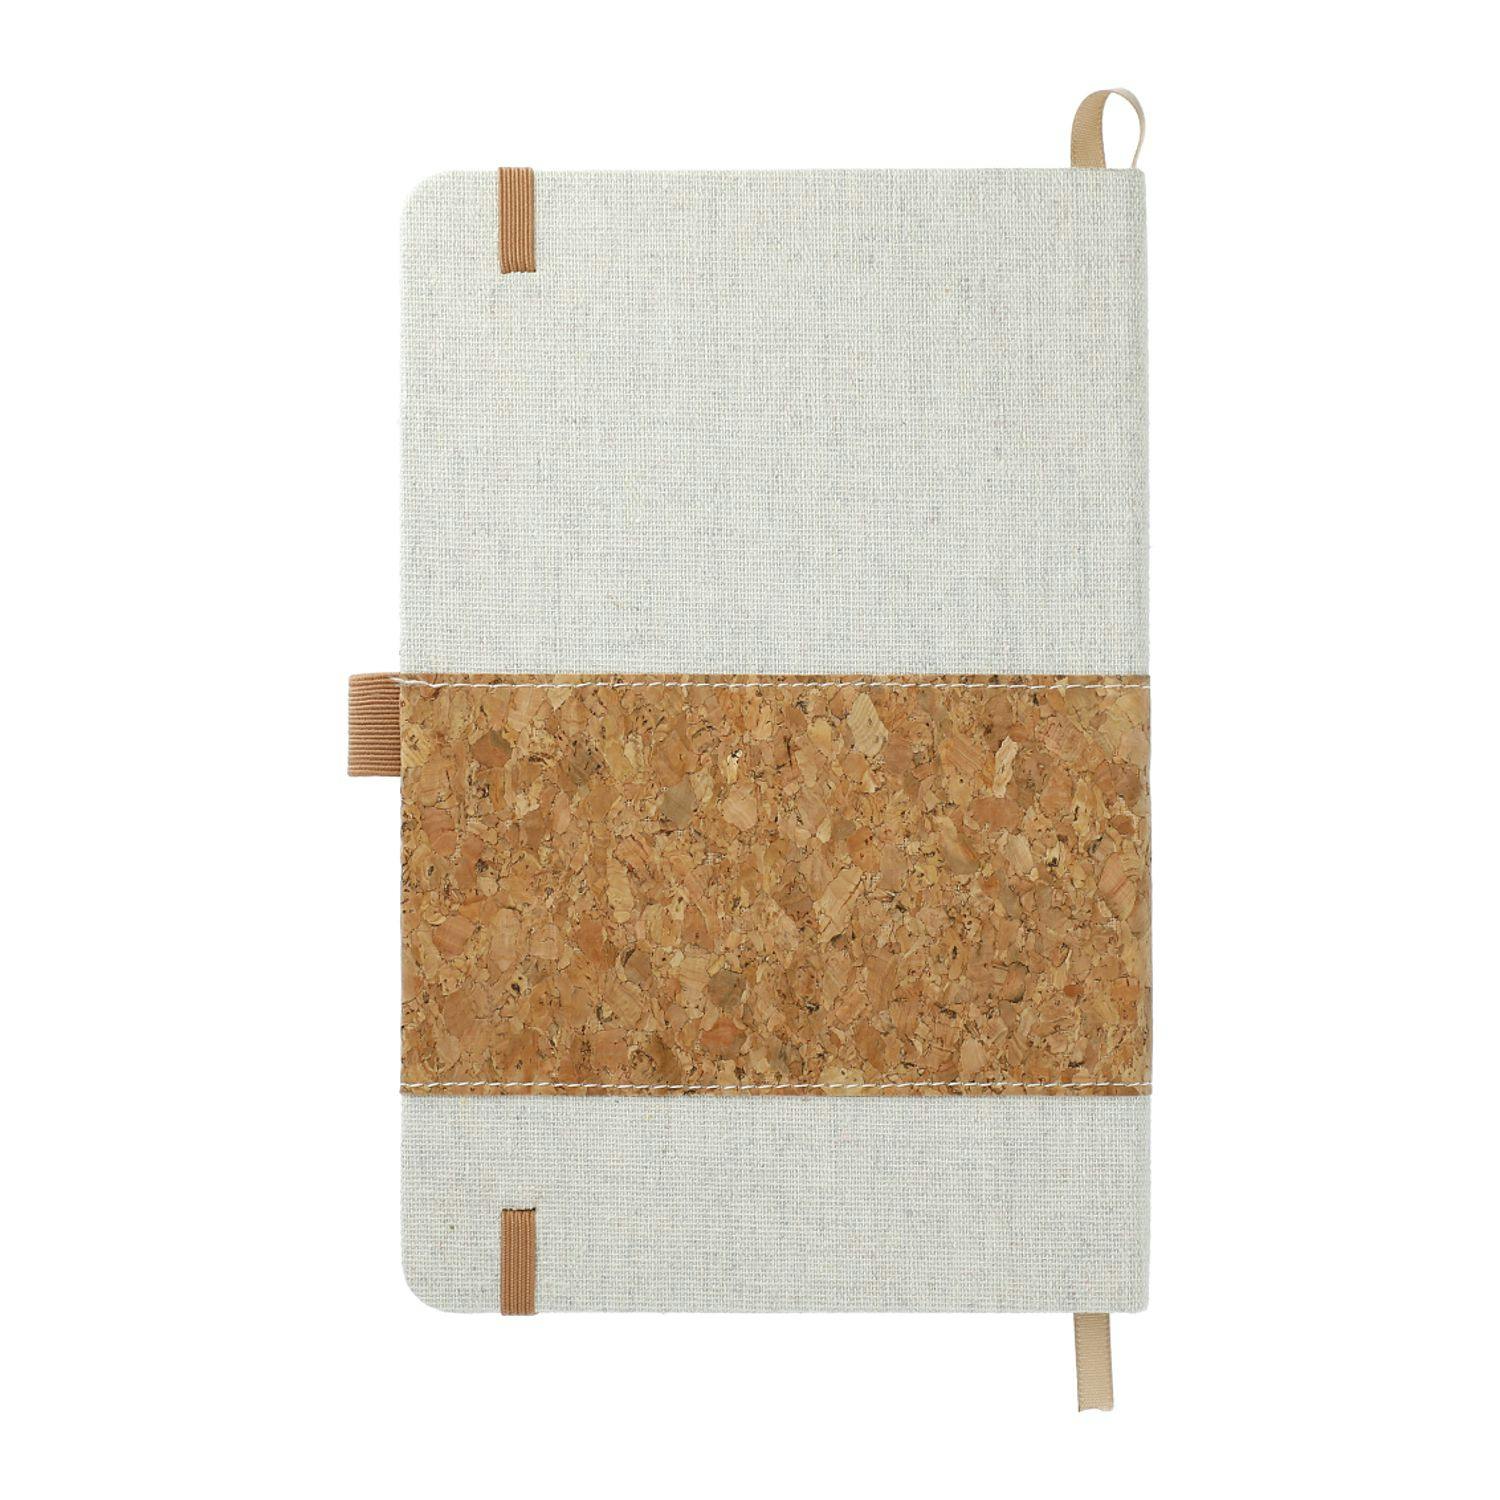 5.5" x 8.5" Recycled Cotton and Cork Bound Notebook - additional Image 2